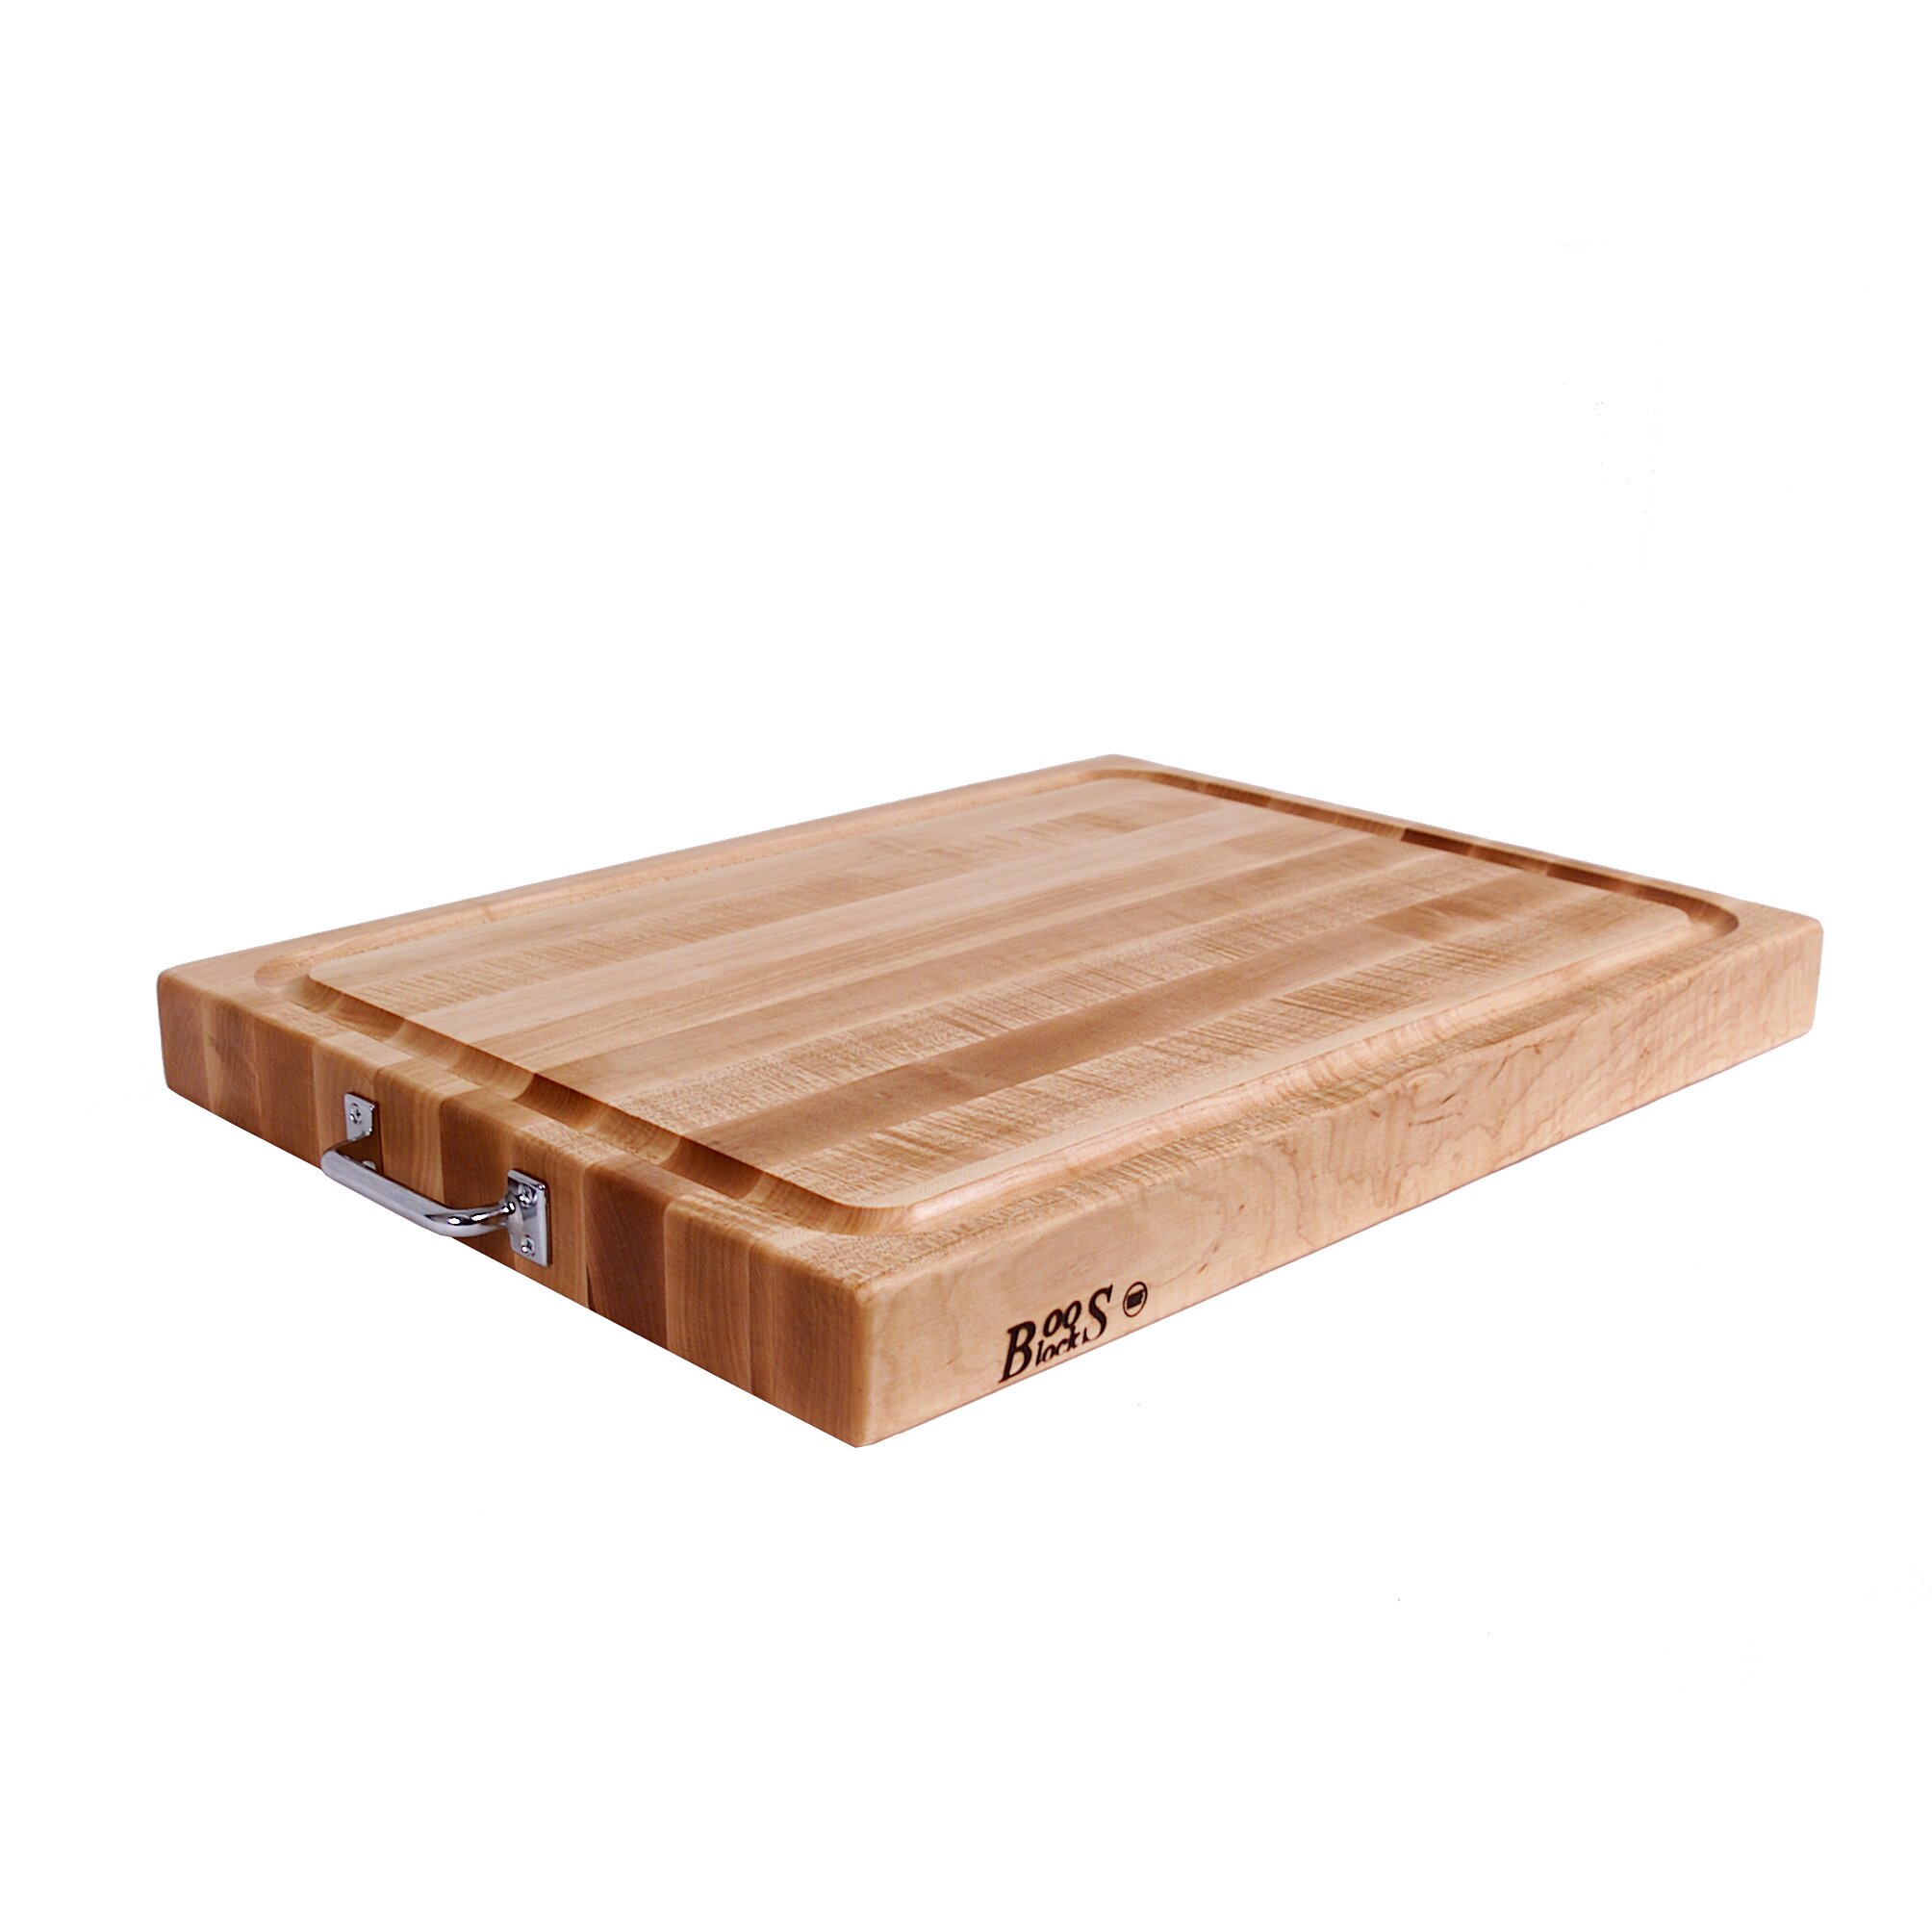 2 Maple Boards BoosBlock Reversible Maple Cutting Board with Stainless Steel Handles